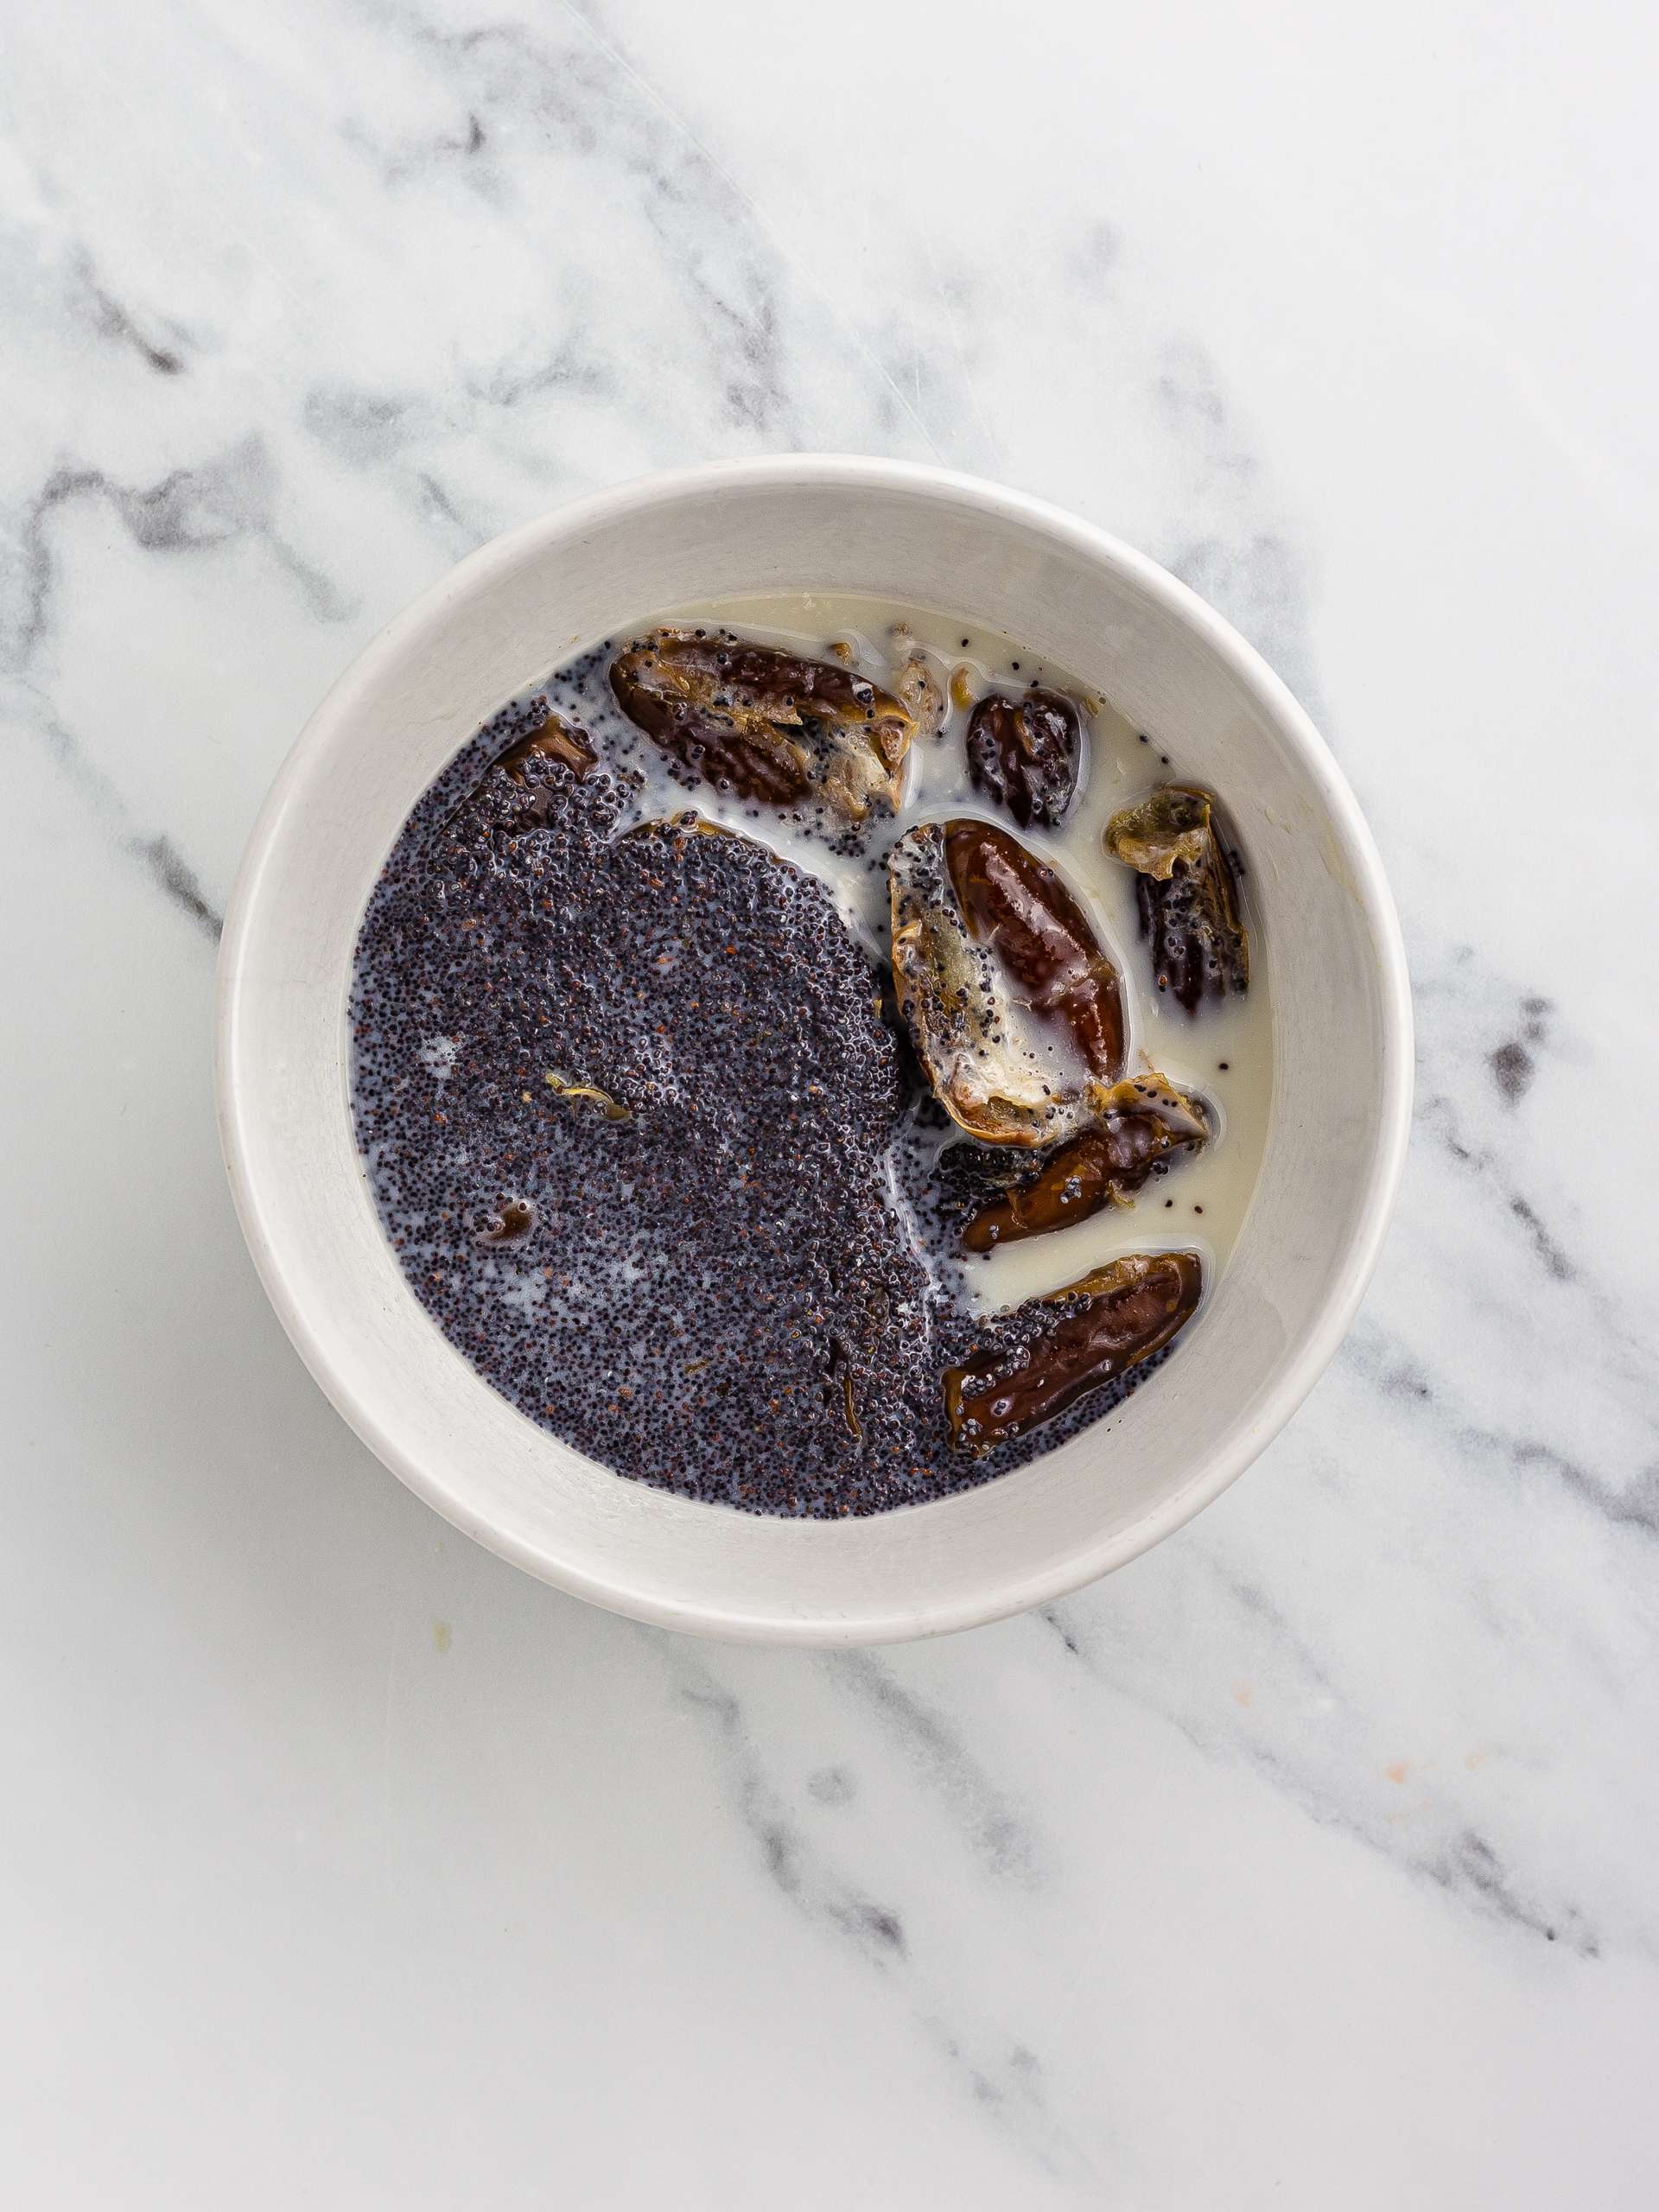 poppy seeds and dates soaking in hot milk